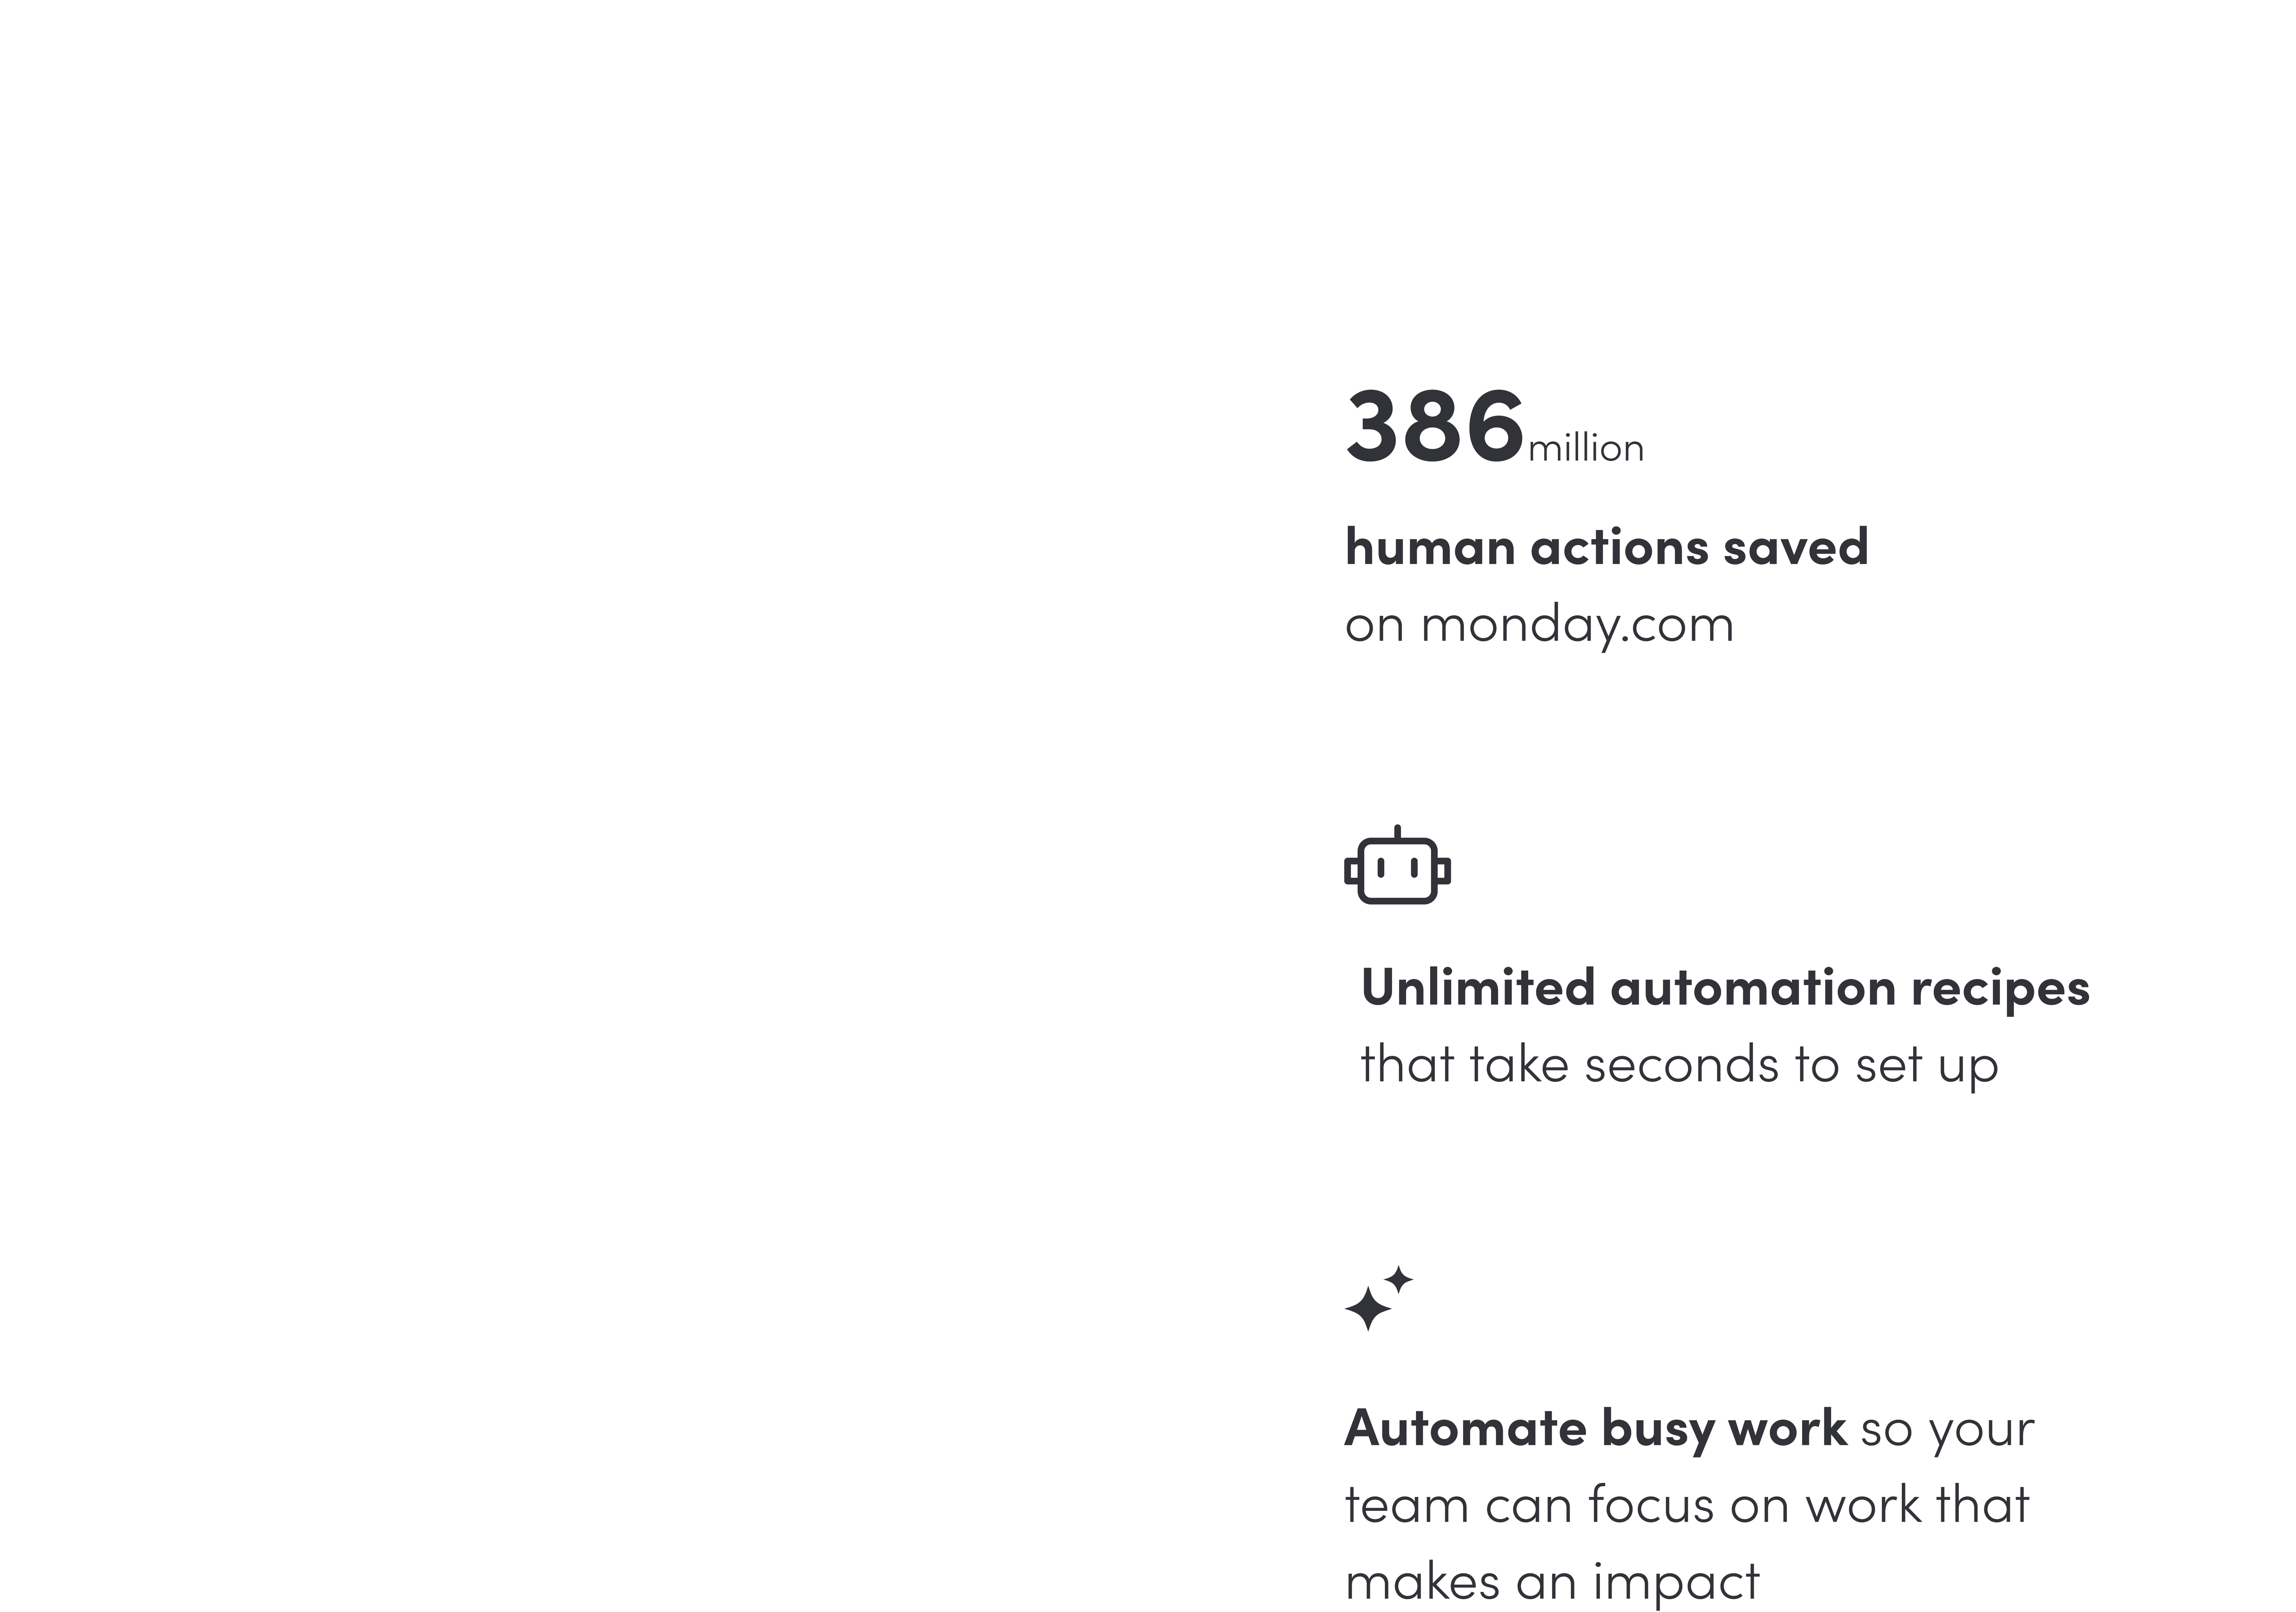 386 million human actions saved on monday.com. Unlimited automation recipes. Automate busy work